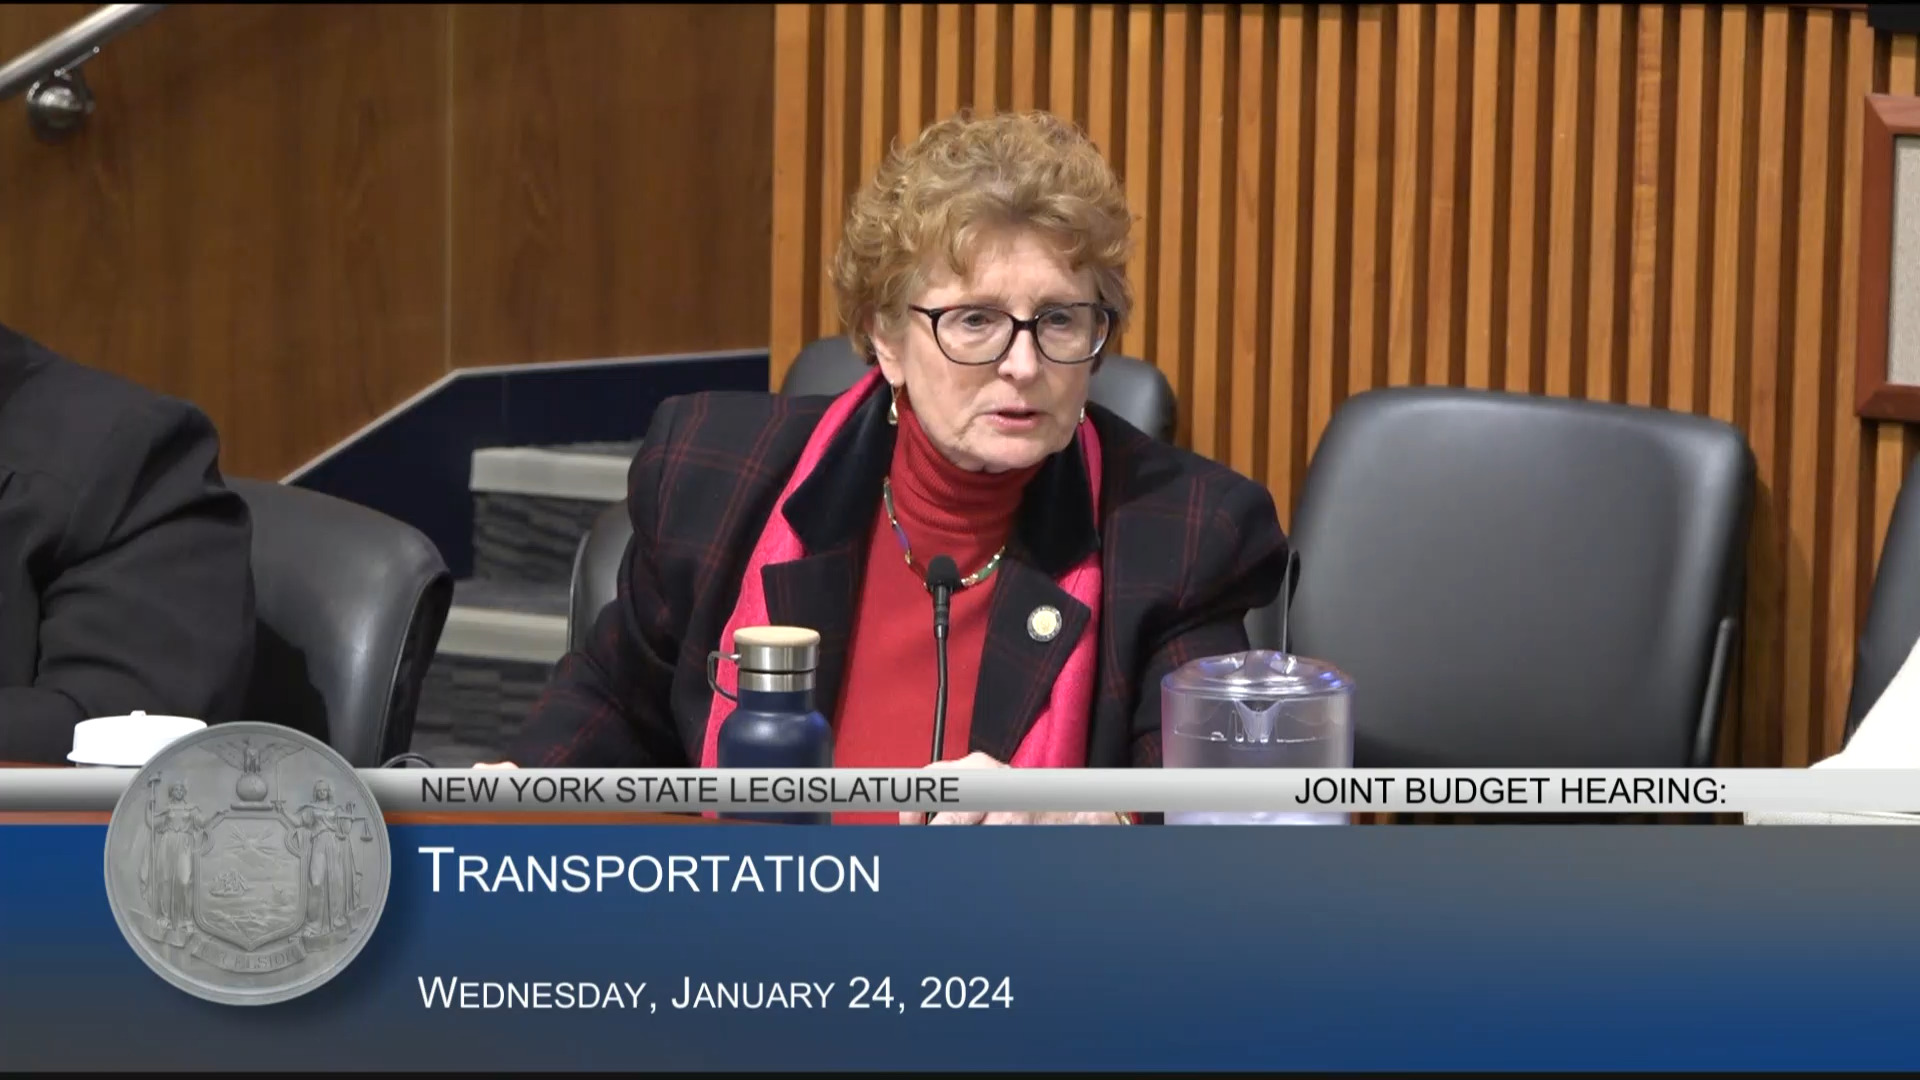 DOT Commissioner Testifies on the BQE During Joint Budget Hearing on Transportation